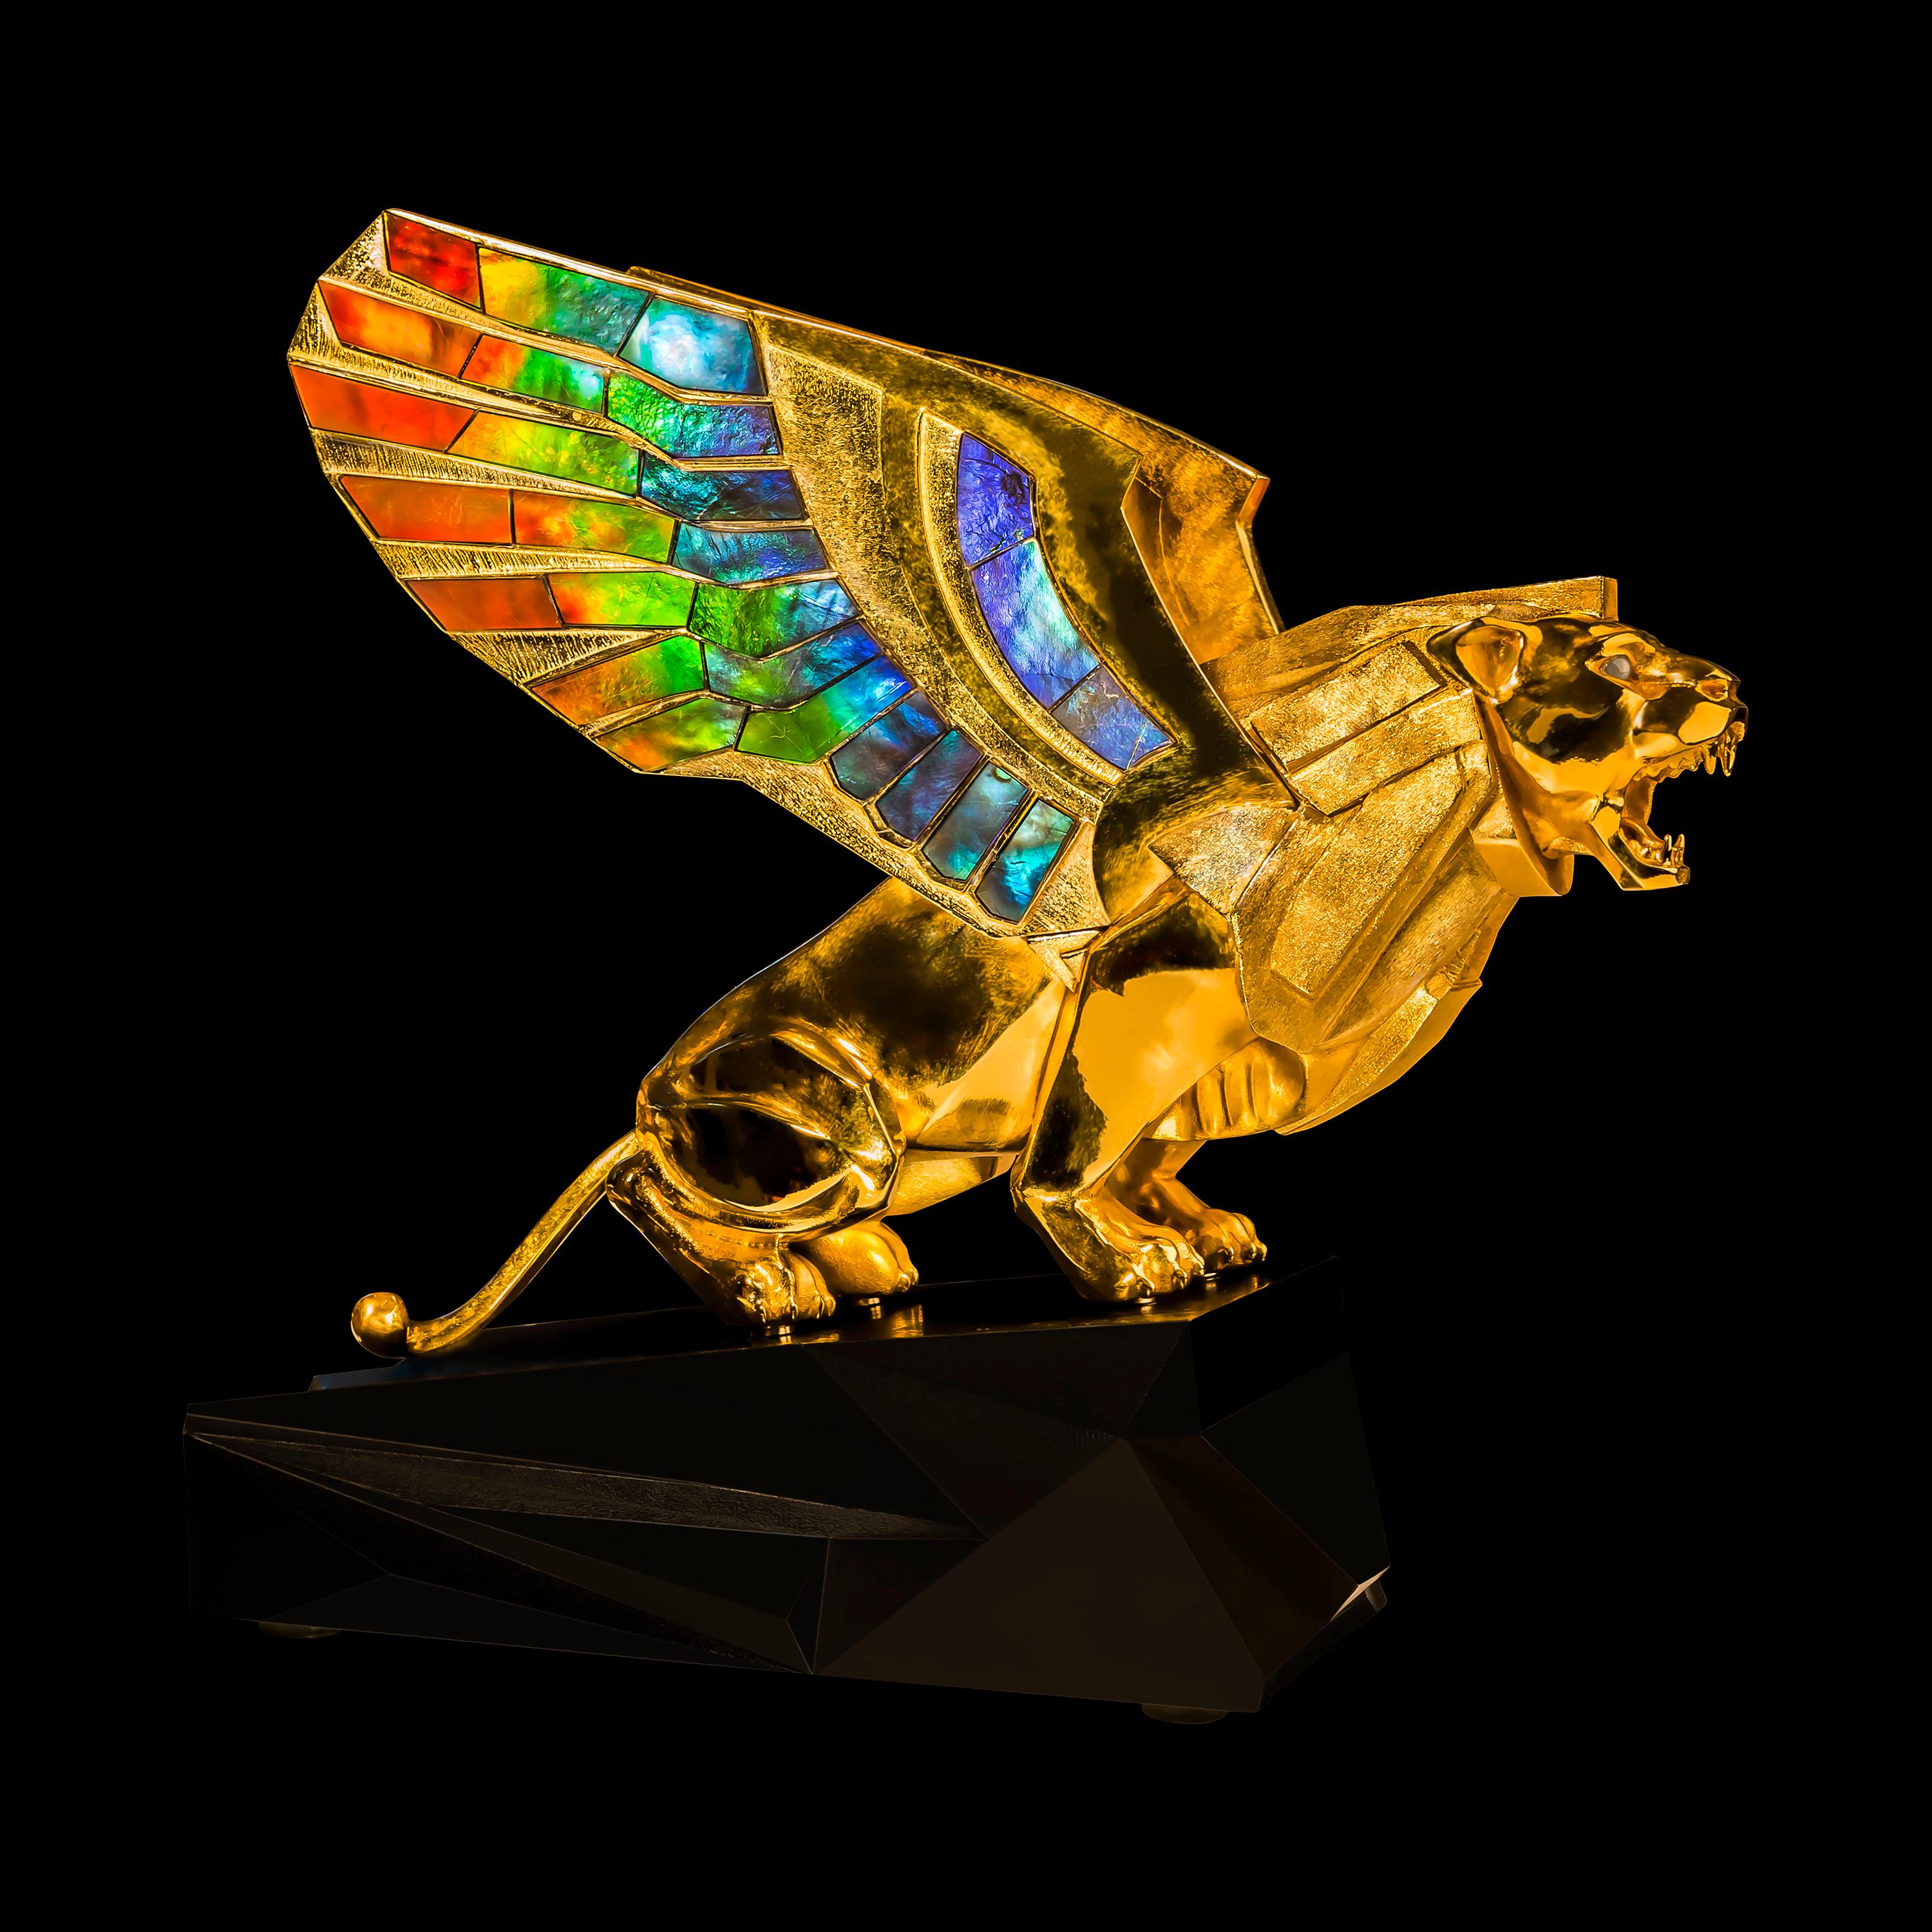 Golden gryphon sculpture in 24K gold plated sterling silver, with wings set with AAA grade ammolite, chrysoberyl cat's eye set upon an oxidized bronze pedestal.

The sculpture depicts a mighty Gryphon crouching in tension is prepared to jump. Its